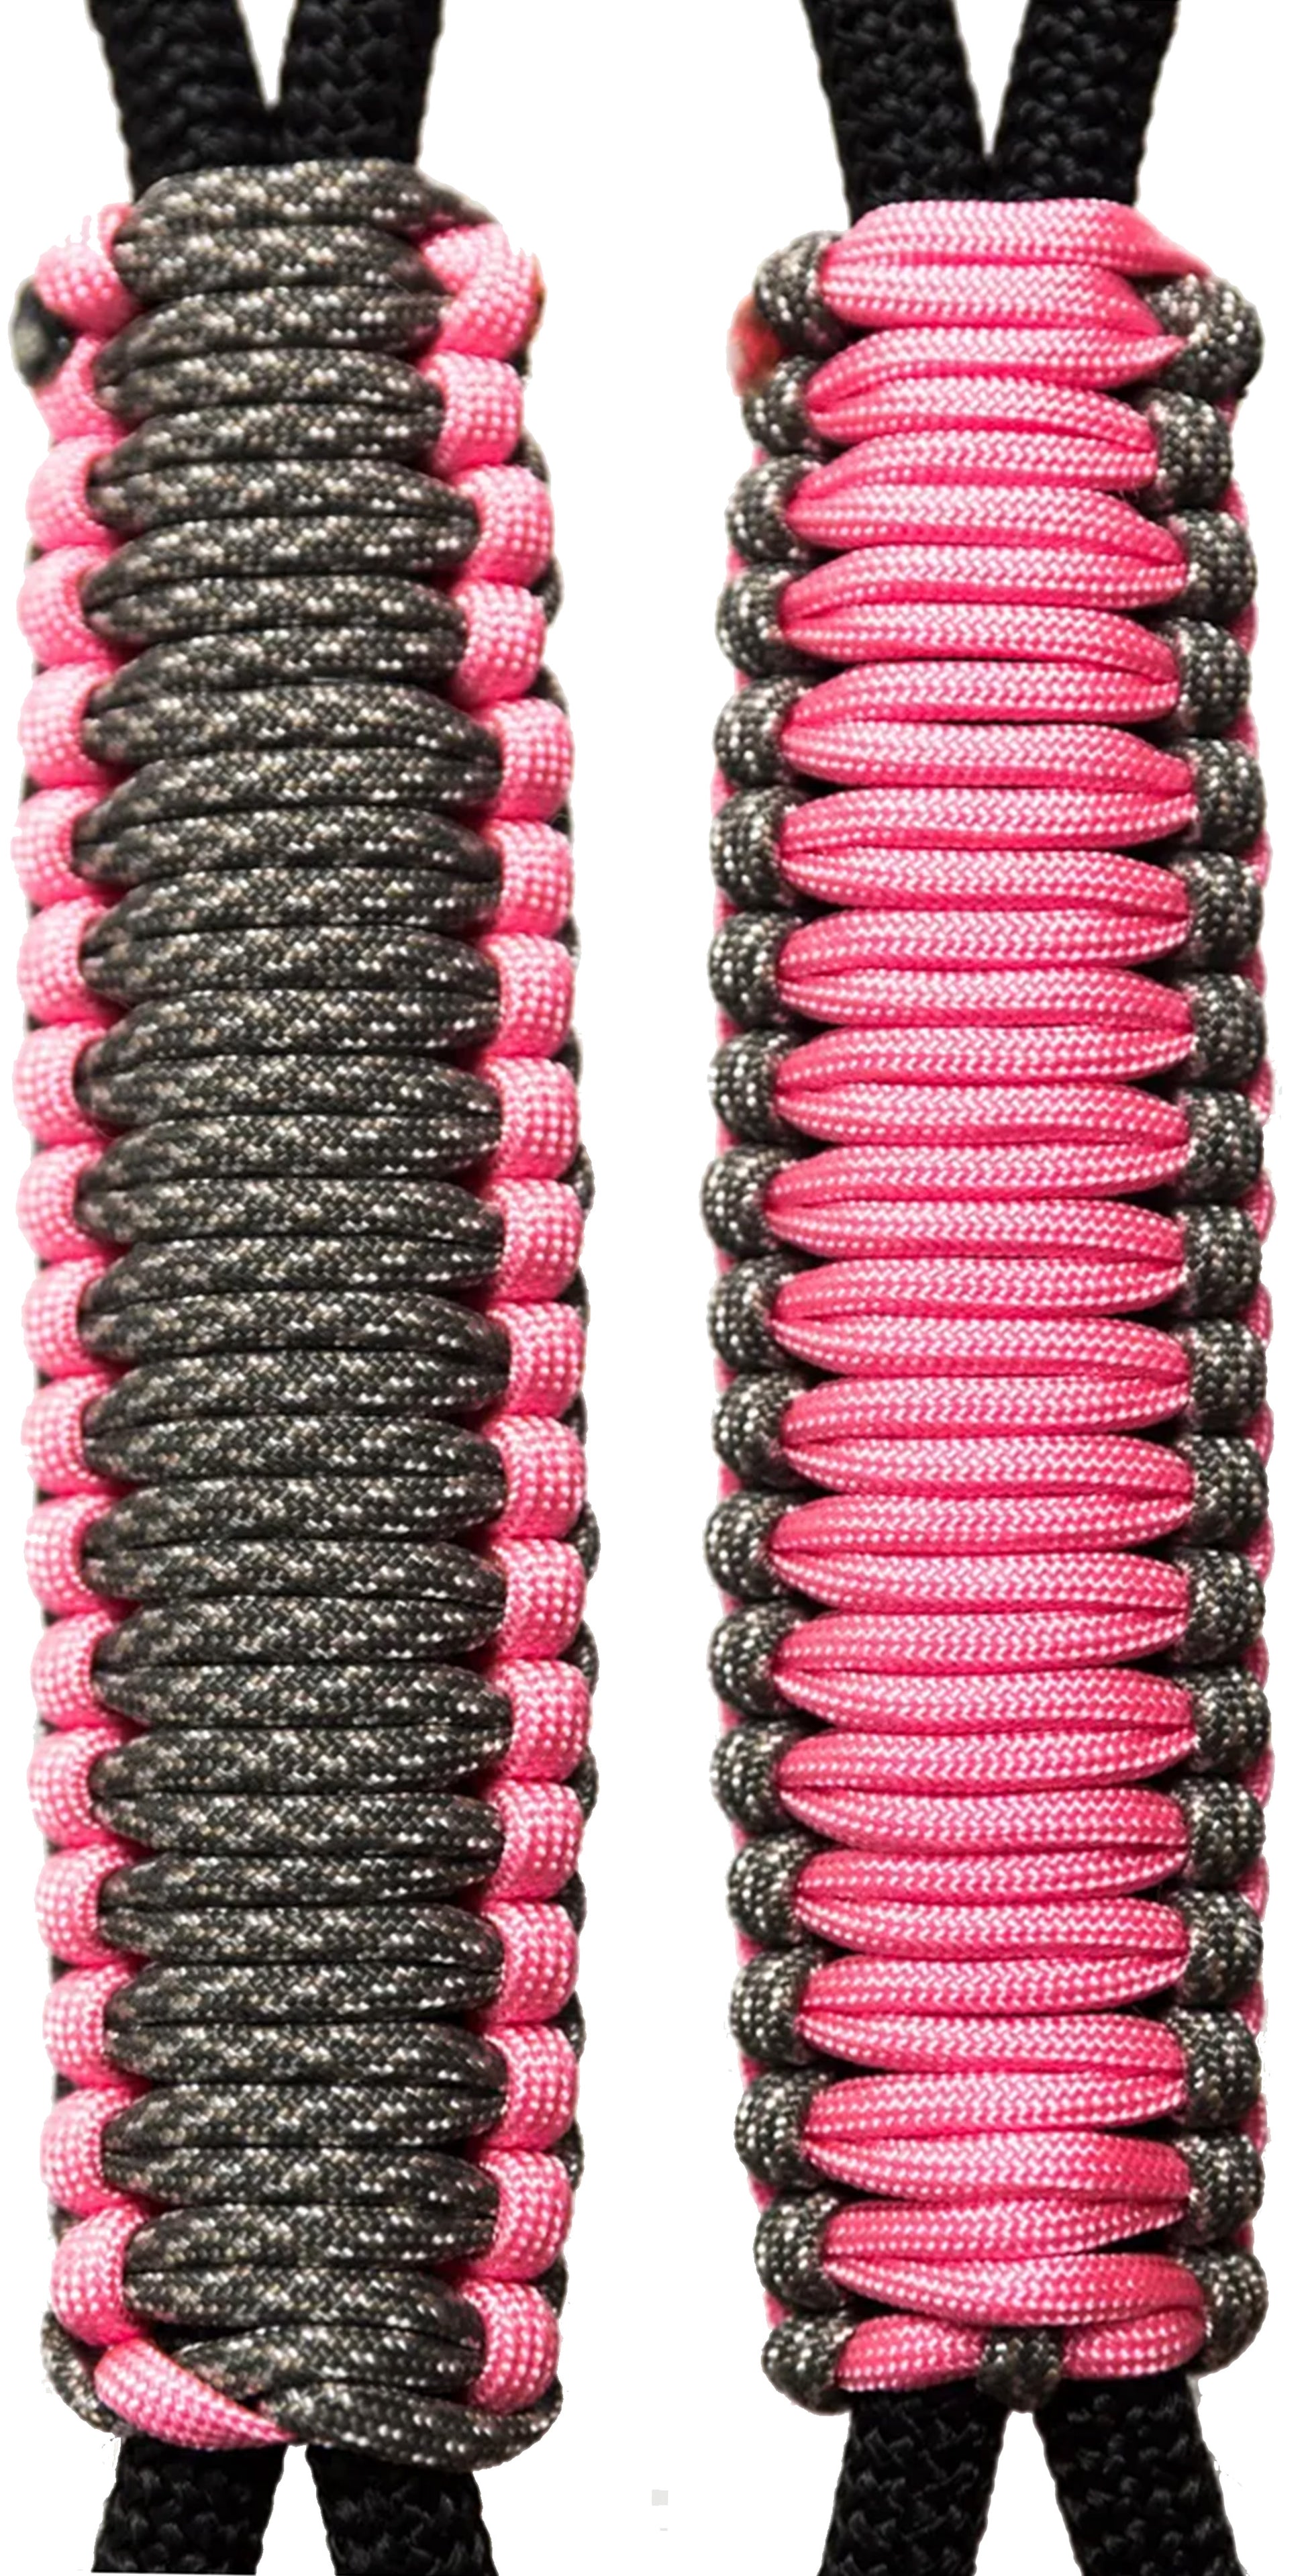 Digi Camo & Baby Pink C007C037 - Paracord Handmade Handles for Stainless Steel Tumblers - Made in USA!